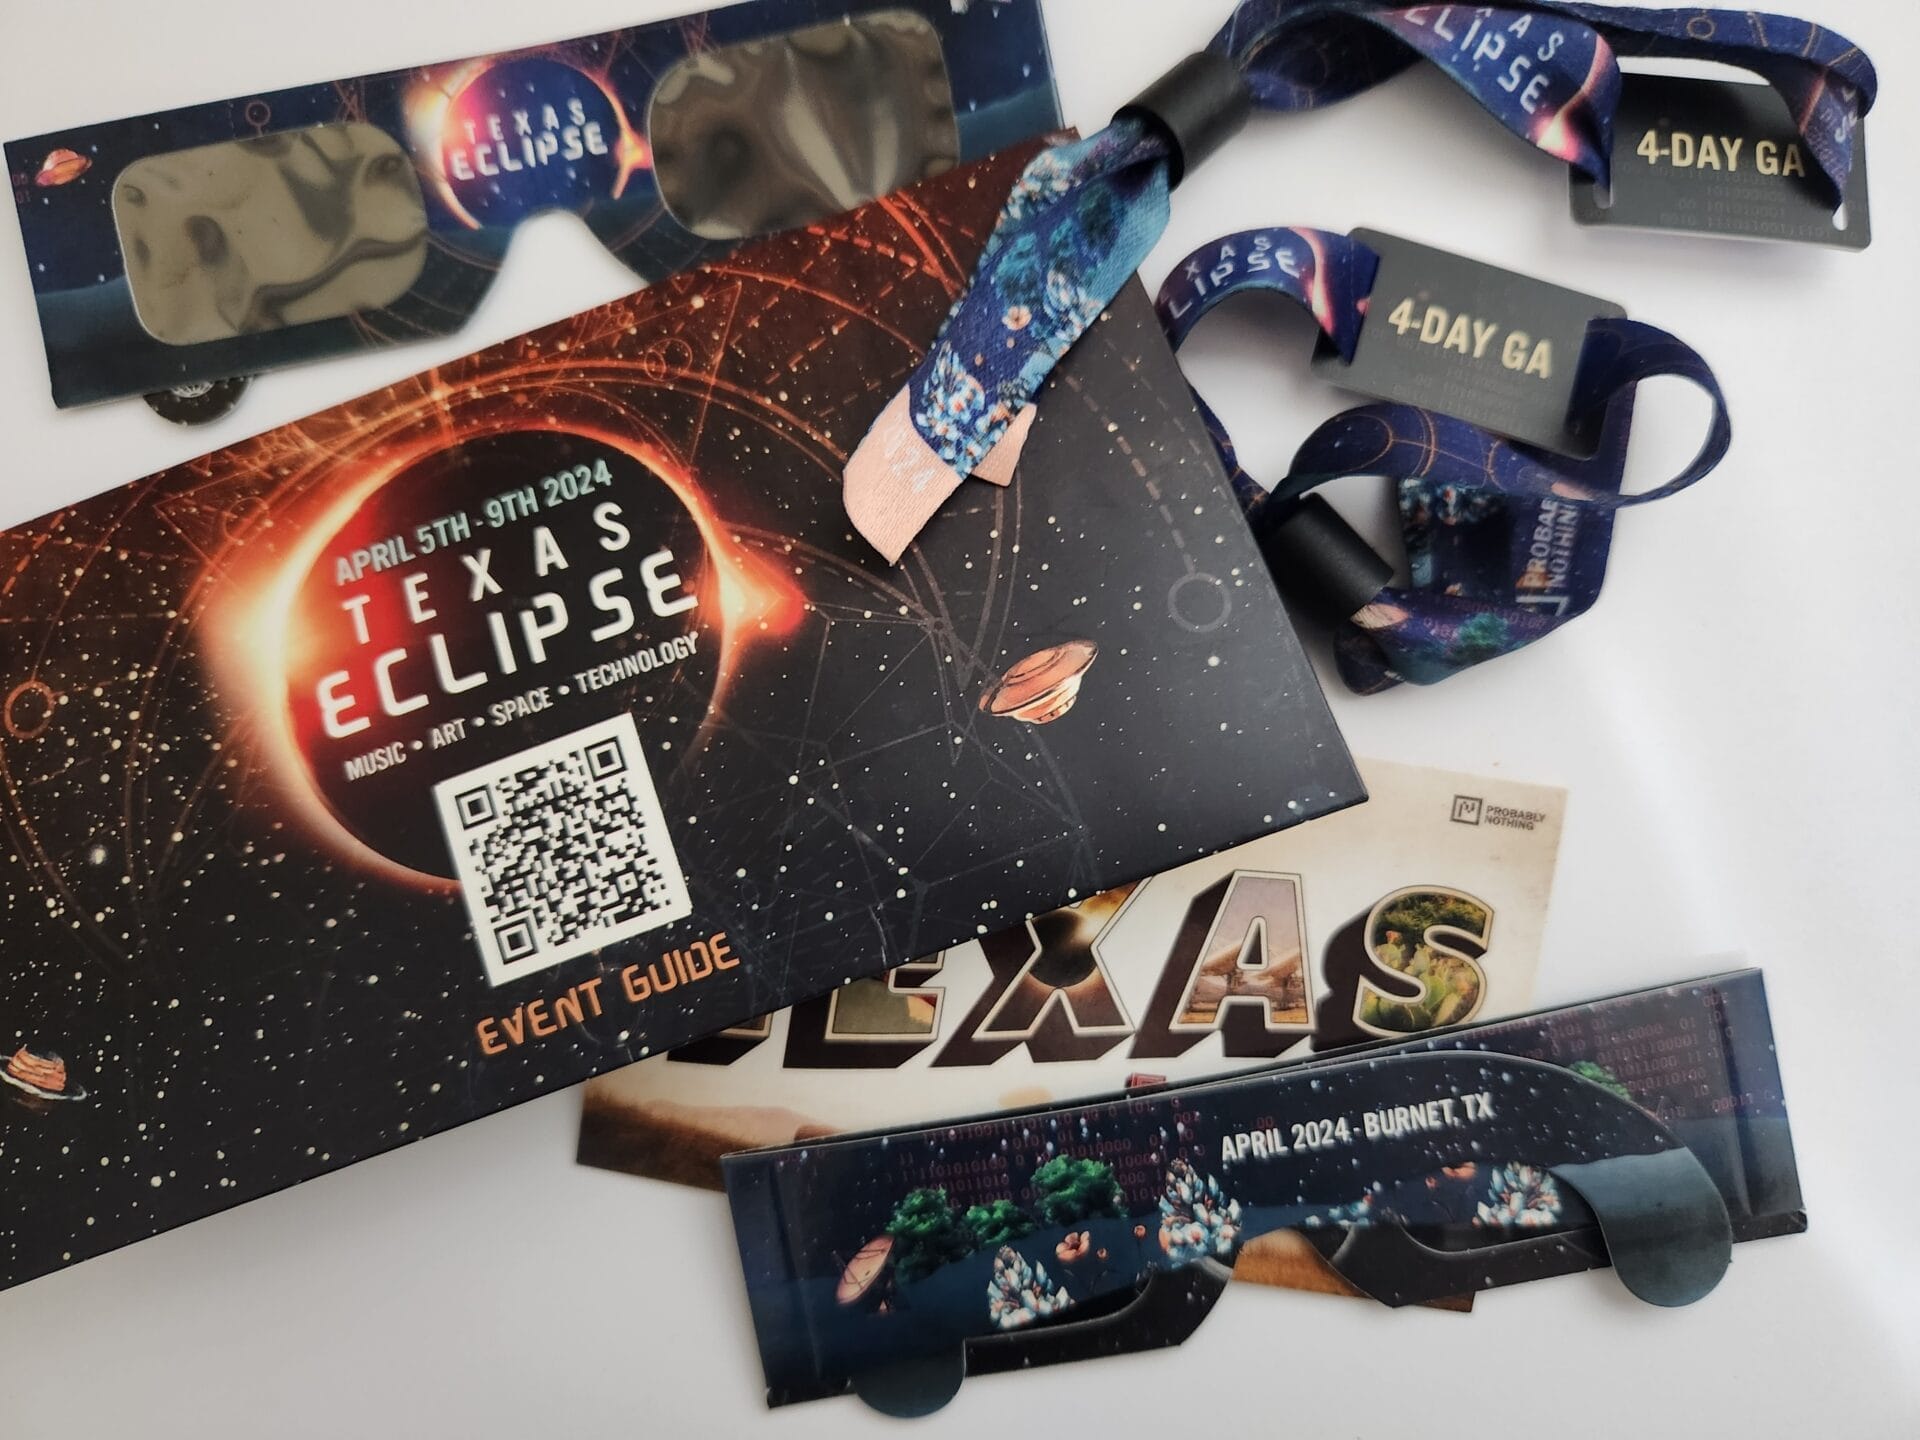 Texas Eclipse Wristbands and Glasses